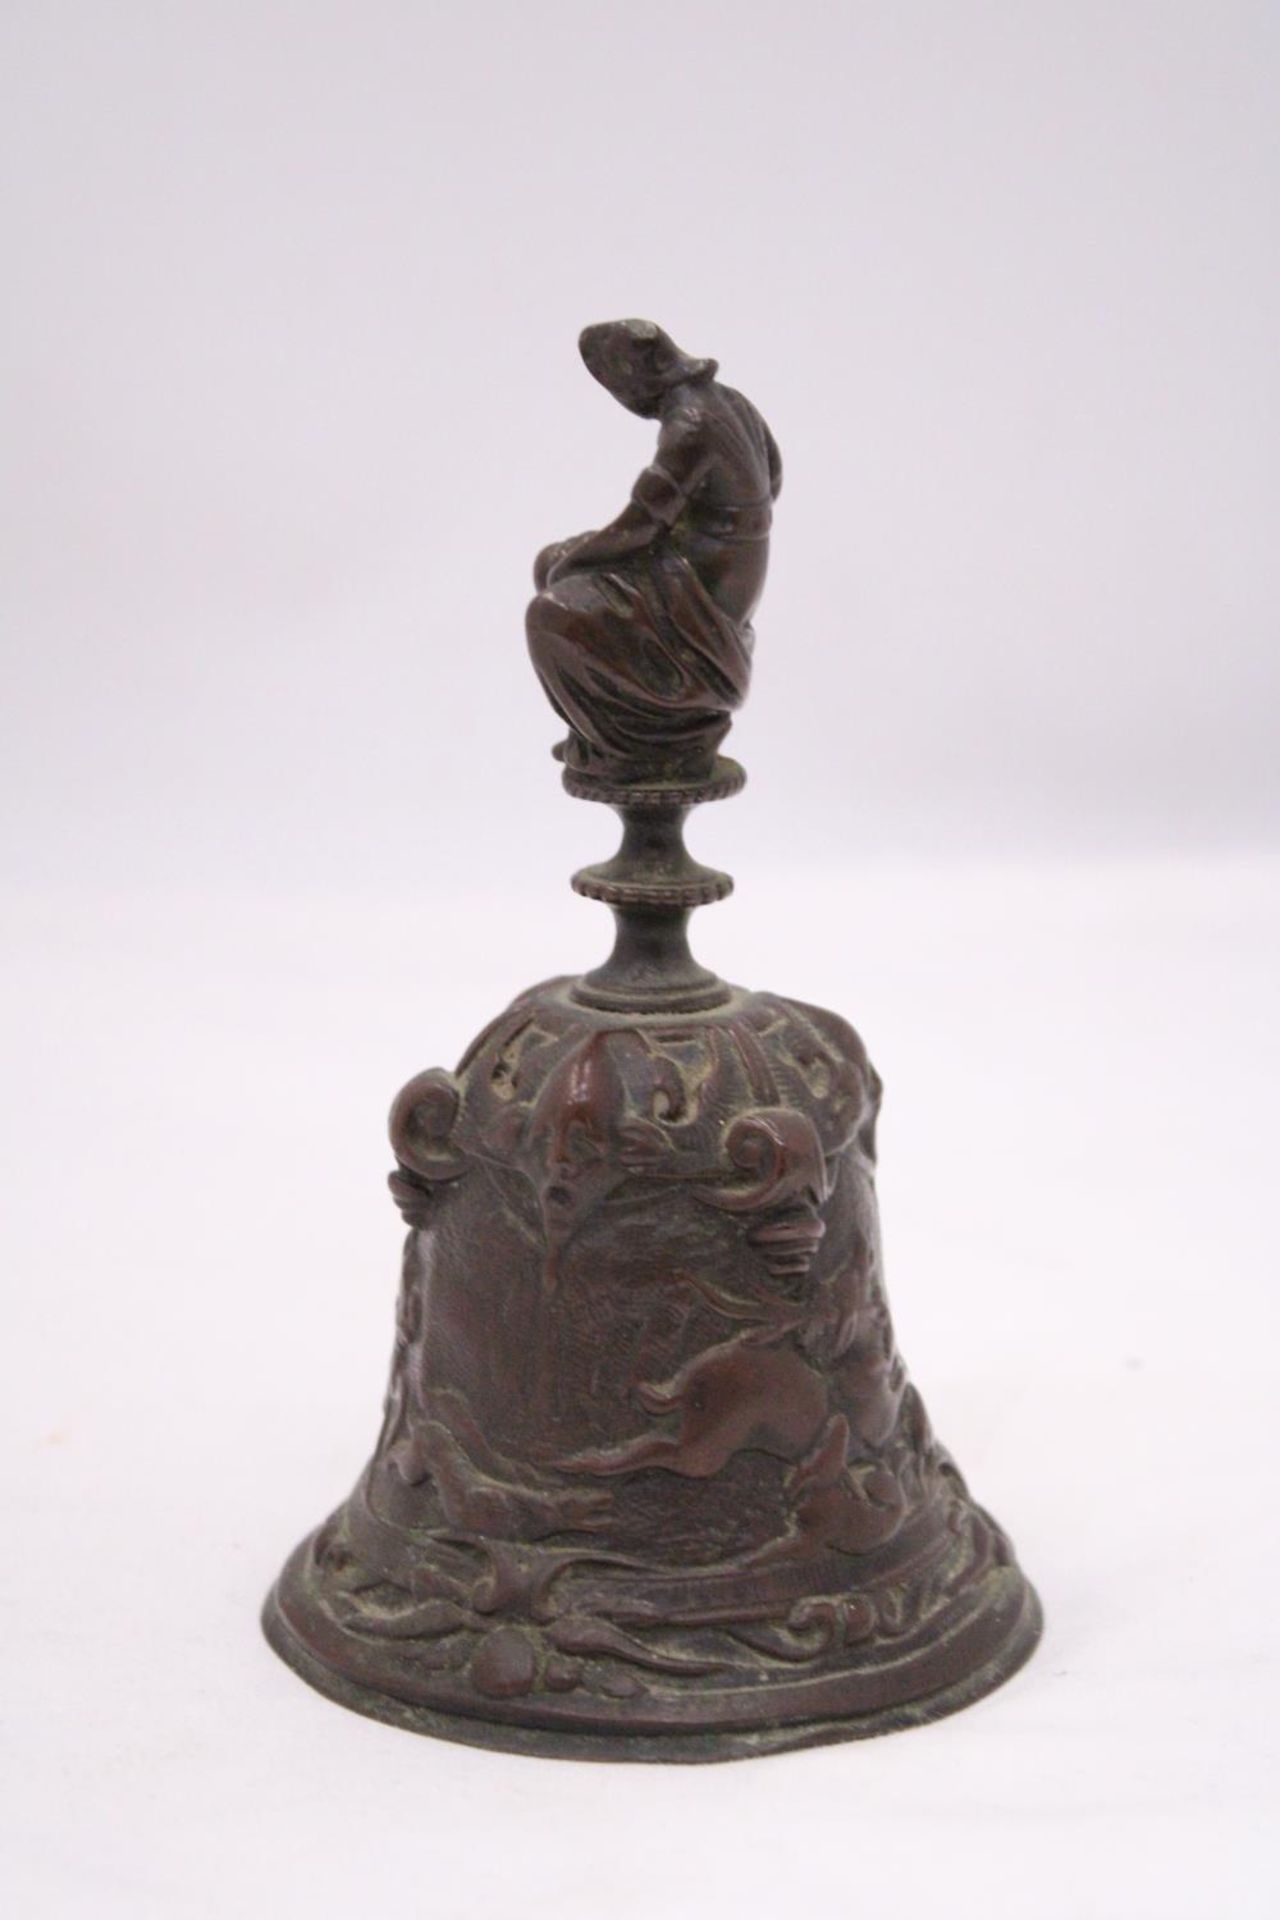 A ORIENTAL BRONZE BELL DEPICTING A HUNTING SCENE AROUND BASE OF BELL - Image 3 of 6